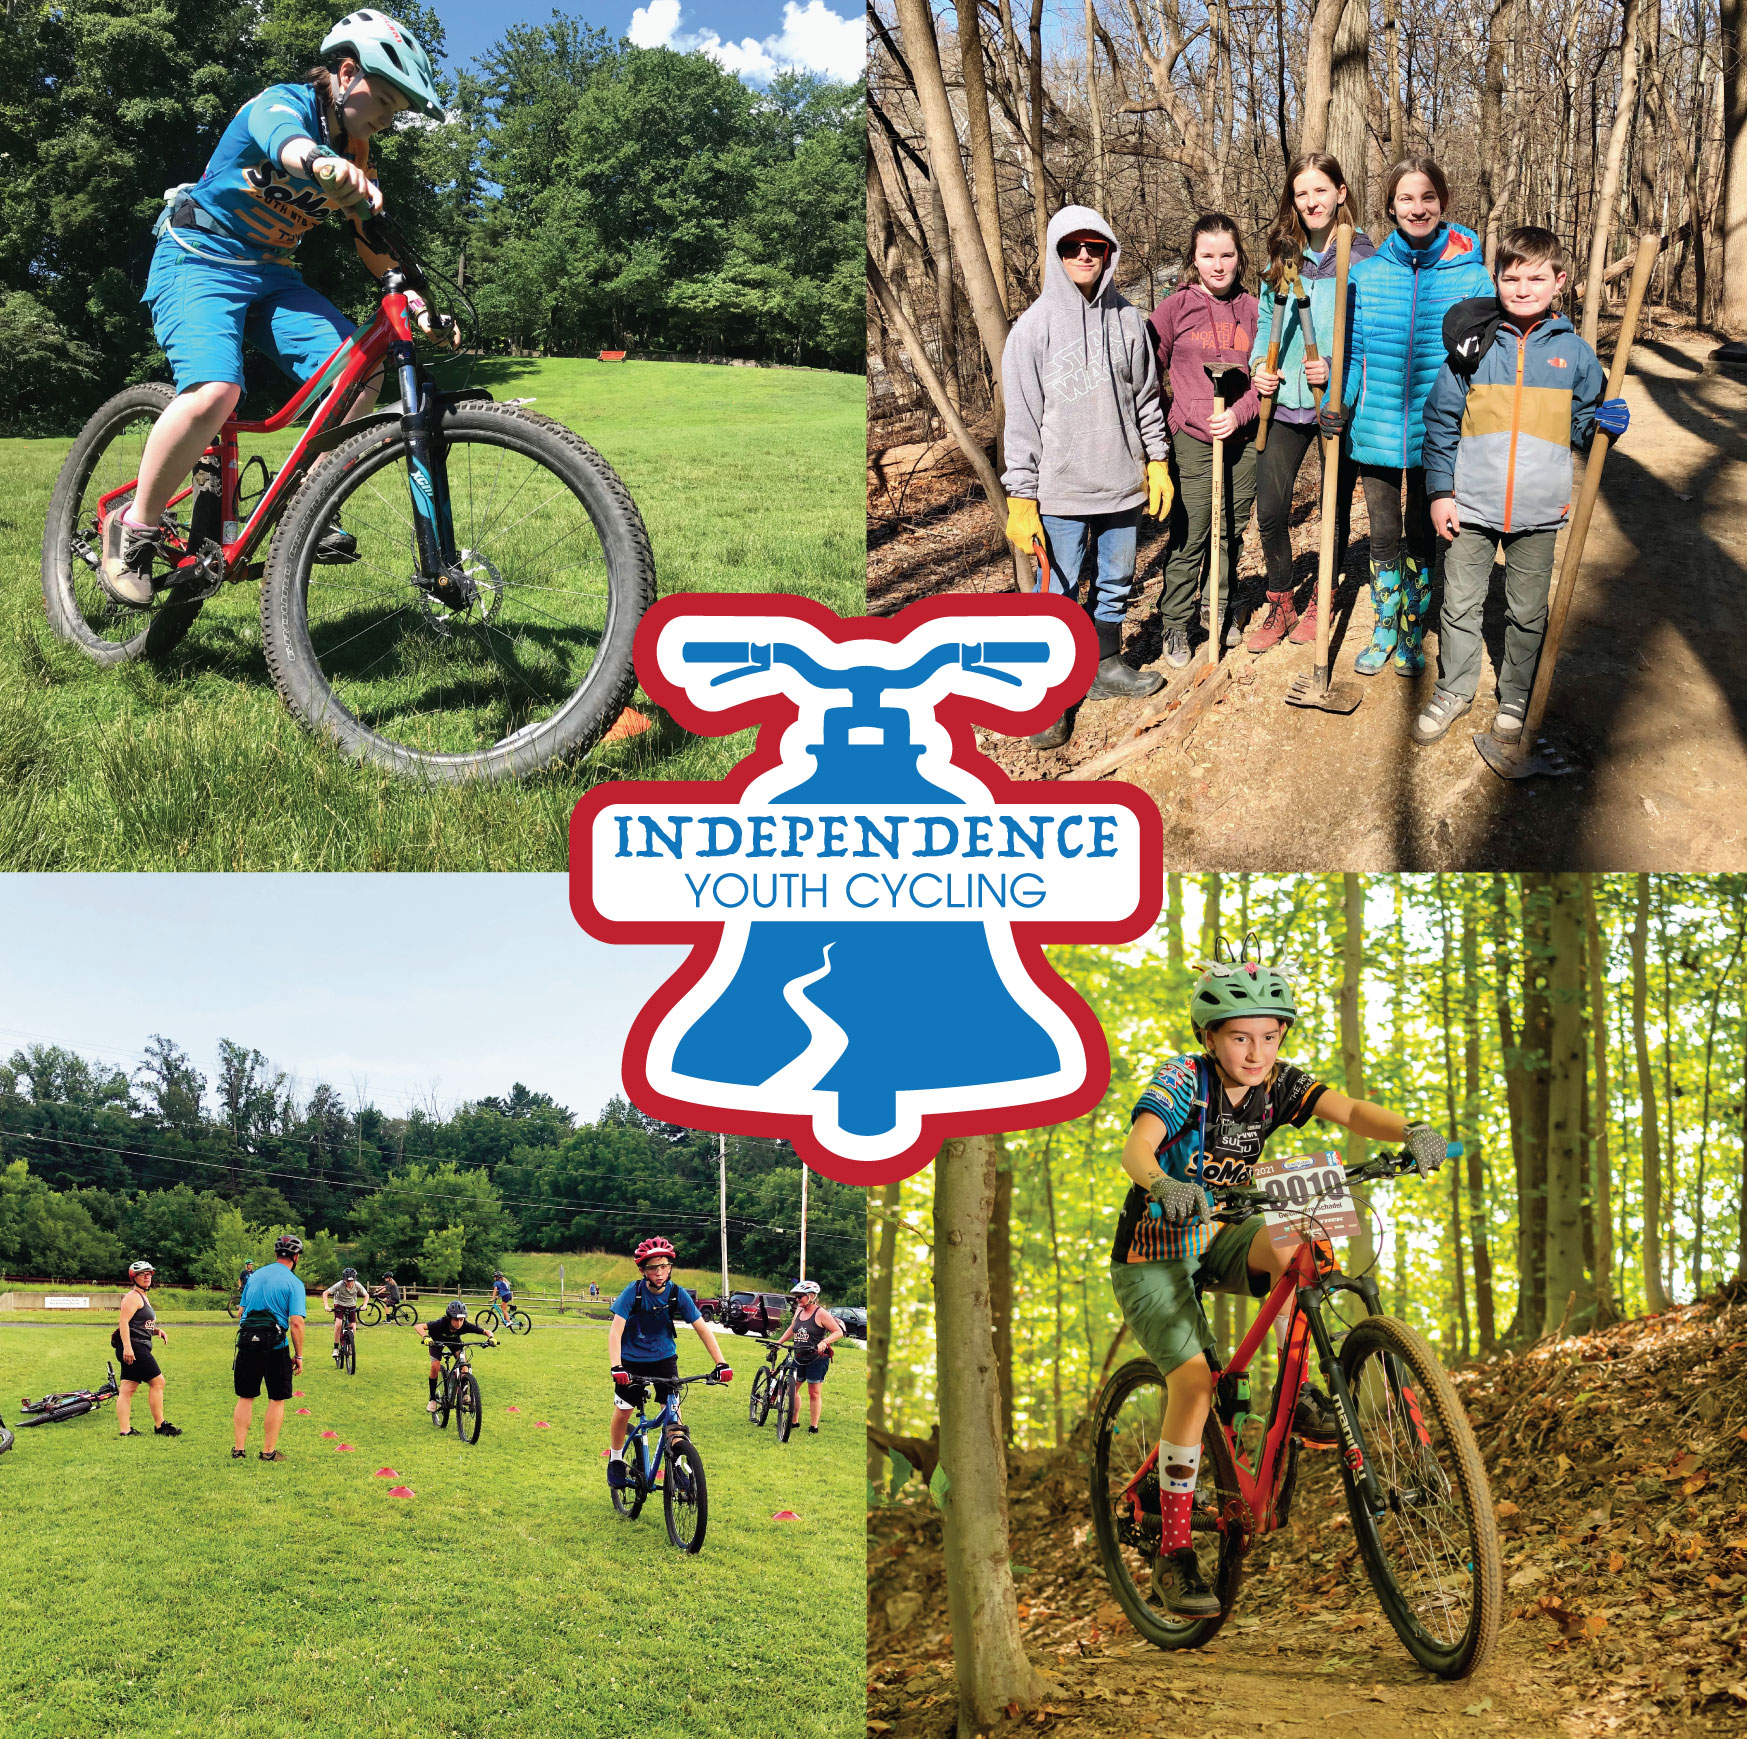 INDEPENDENCE YOUTH CYCLING TO MAKE ITS OFFICIAL DEBUT AT THE PHILLY BIKE EXPO AND SHARE ITS VISION TO GET MORE KIDS ON BIKES